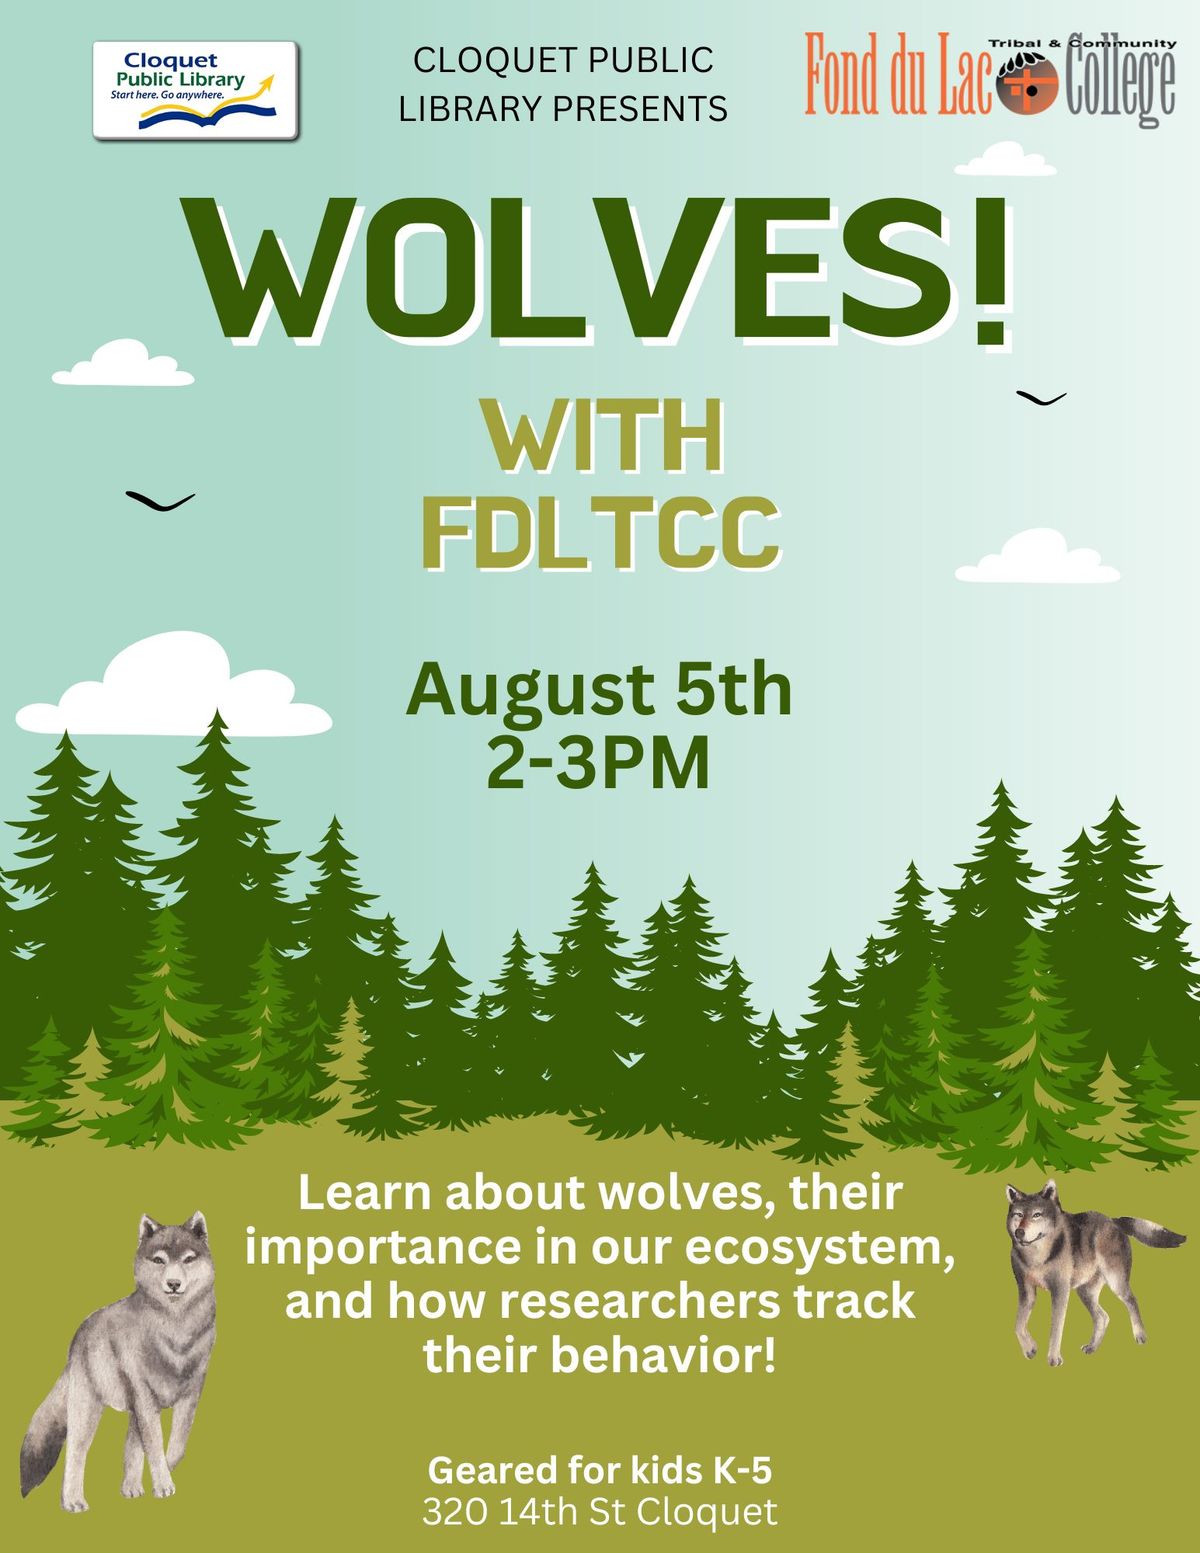 Wolves! with FDLTCC